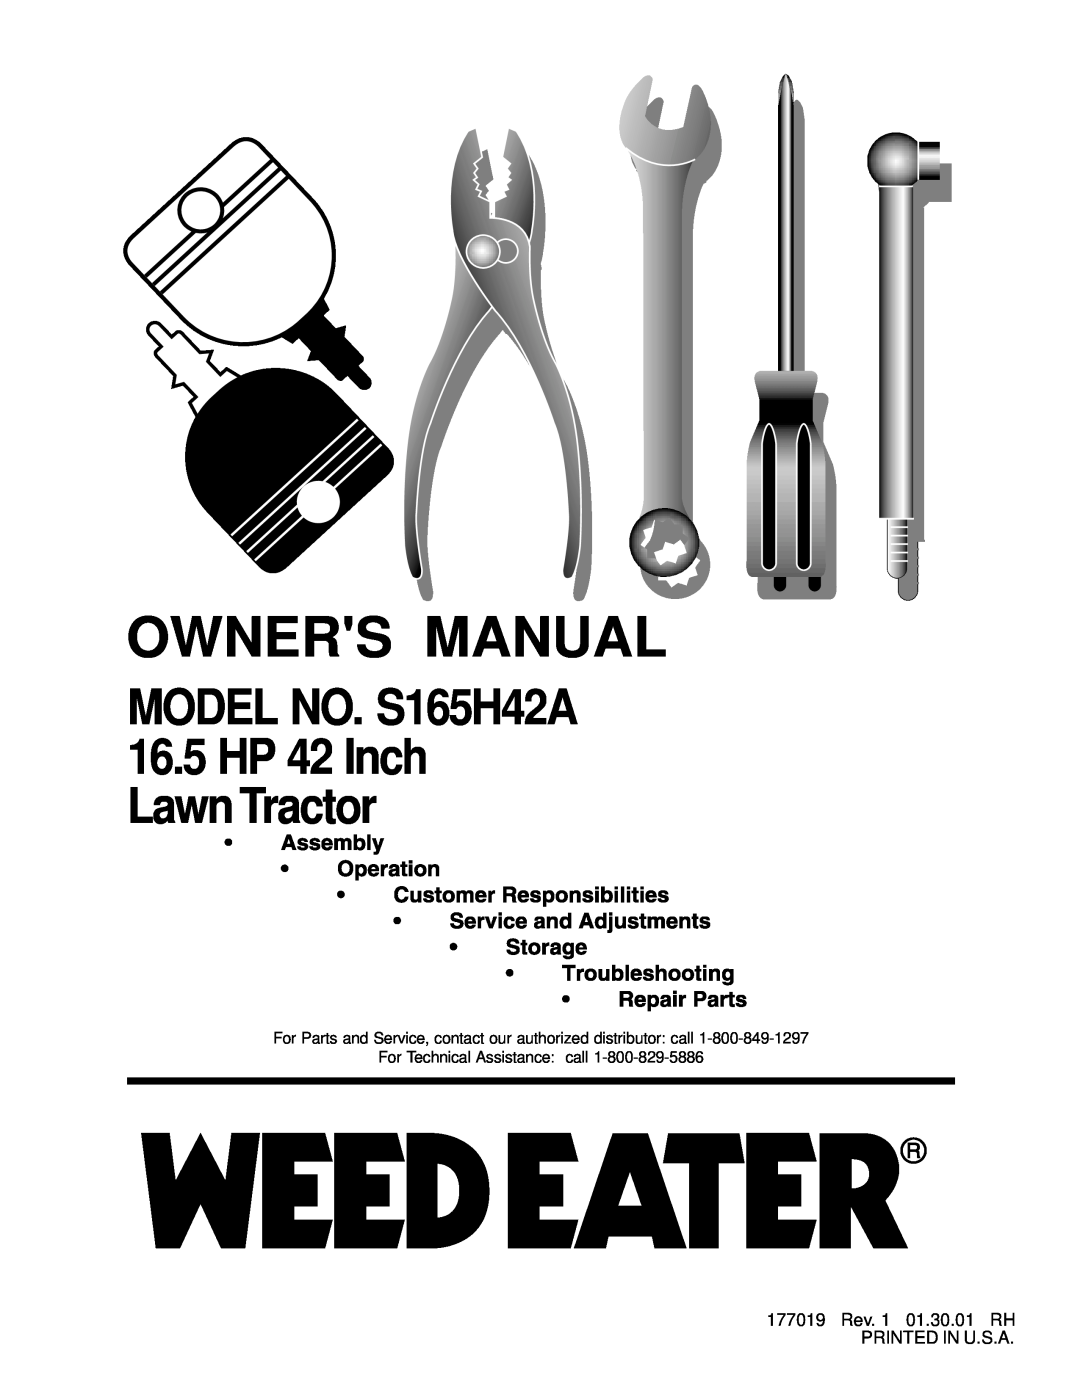 Weed Eater 177019 manual MODEL NO. S165H42A 16.5 HP 42 Inch Lawn Tractor 